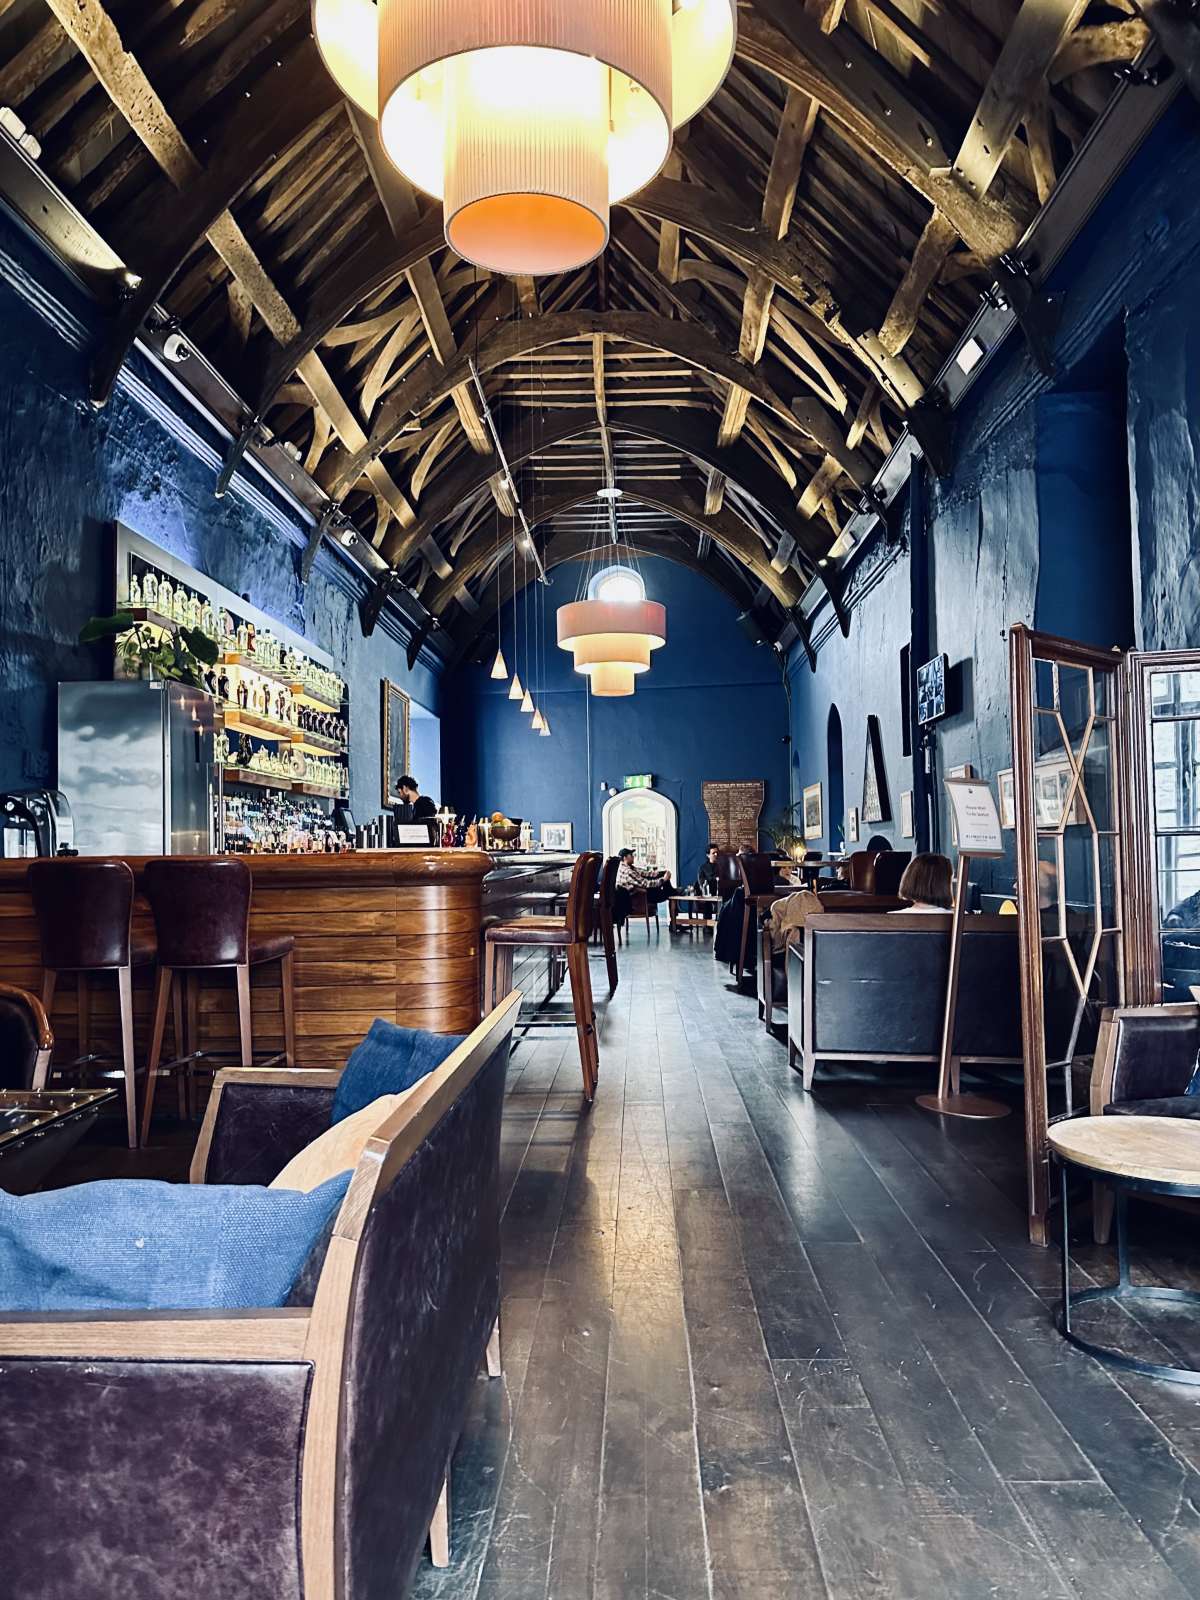 Interior of the Plymouth Gin Distillery bar with a rustic aesthetic, featuring high wooden beam ceilings, cozy blue upholstered seating, and warm pendant lighting, inviting a relaxed ambiance.